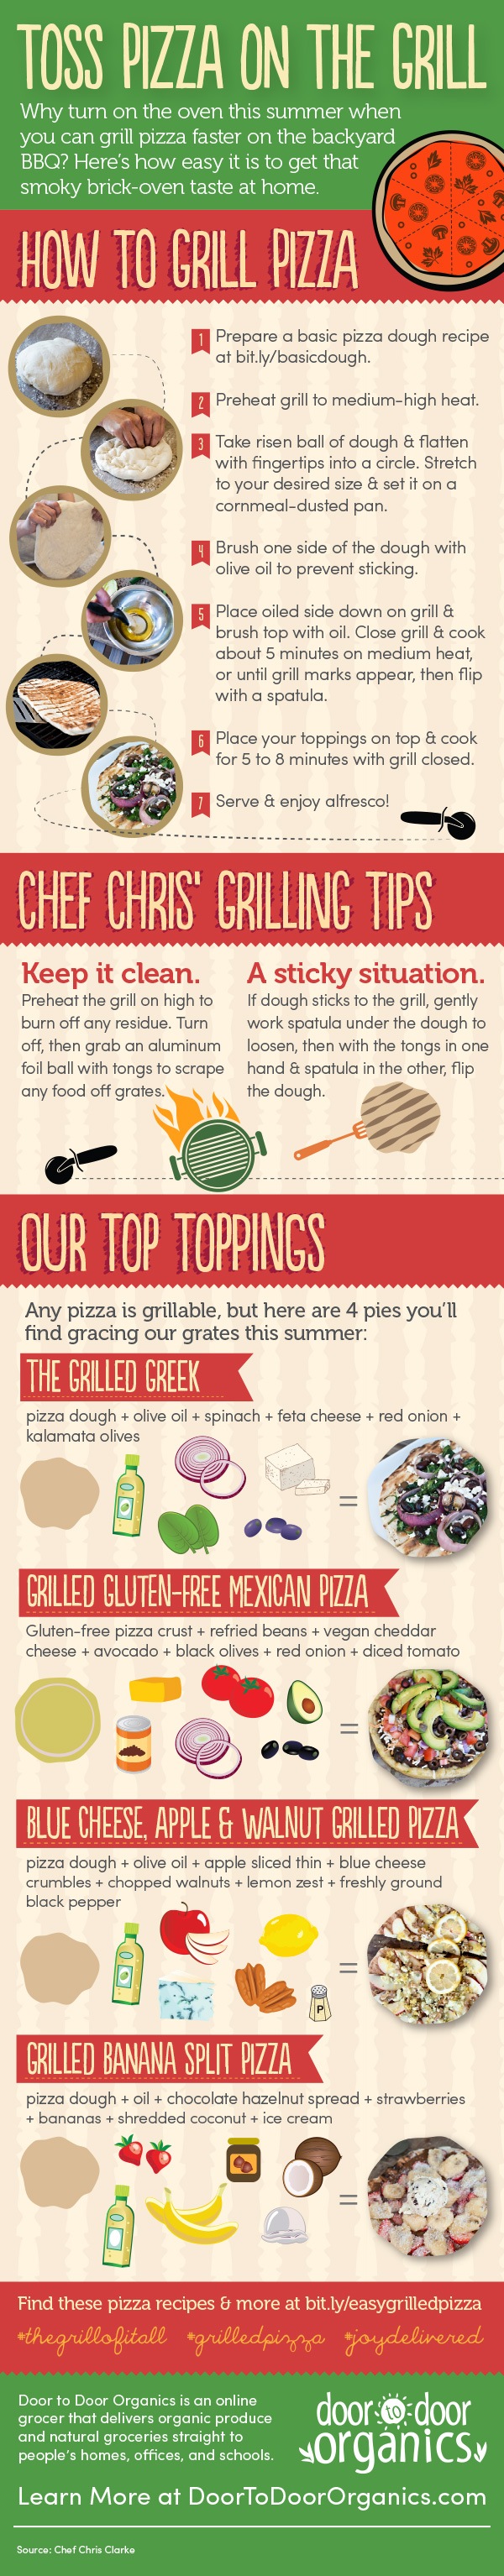 Toss-Pizza-On-Grill-Infographic